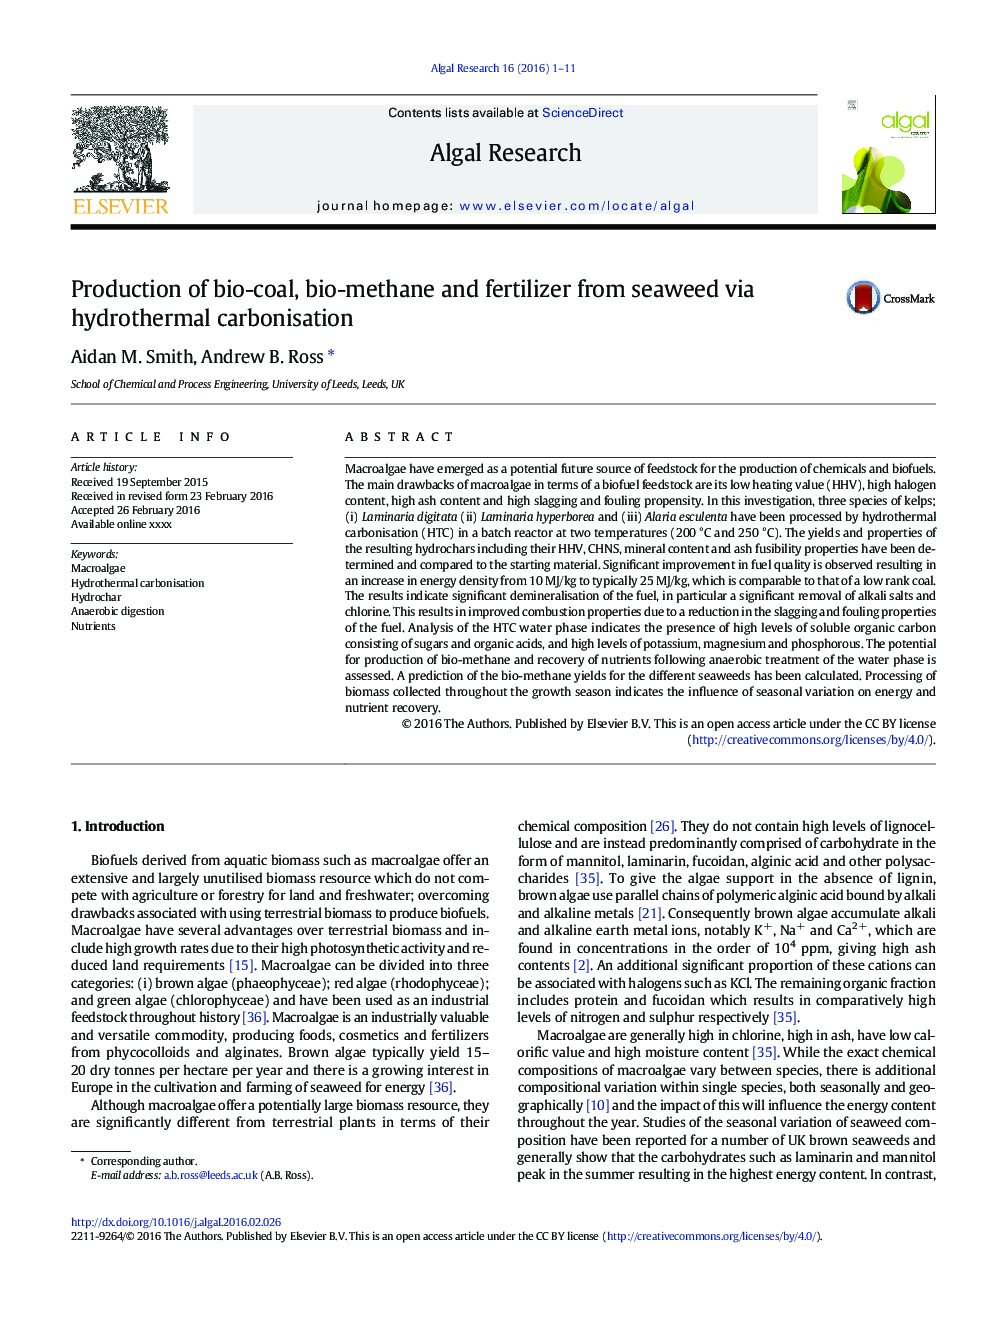 Production of bio-coal, bio-methane and fertilizer from seaweed via hydrothermal carbonisation